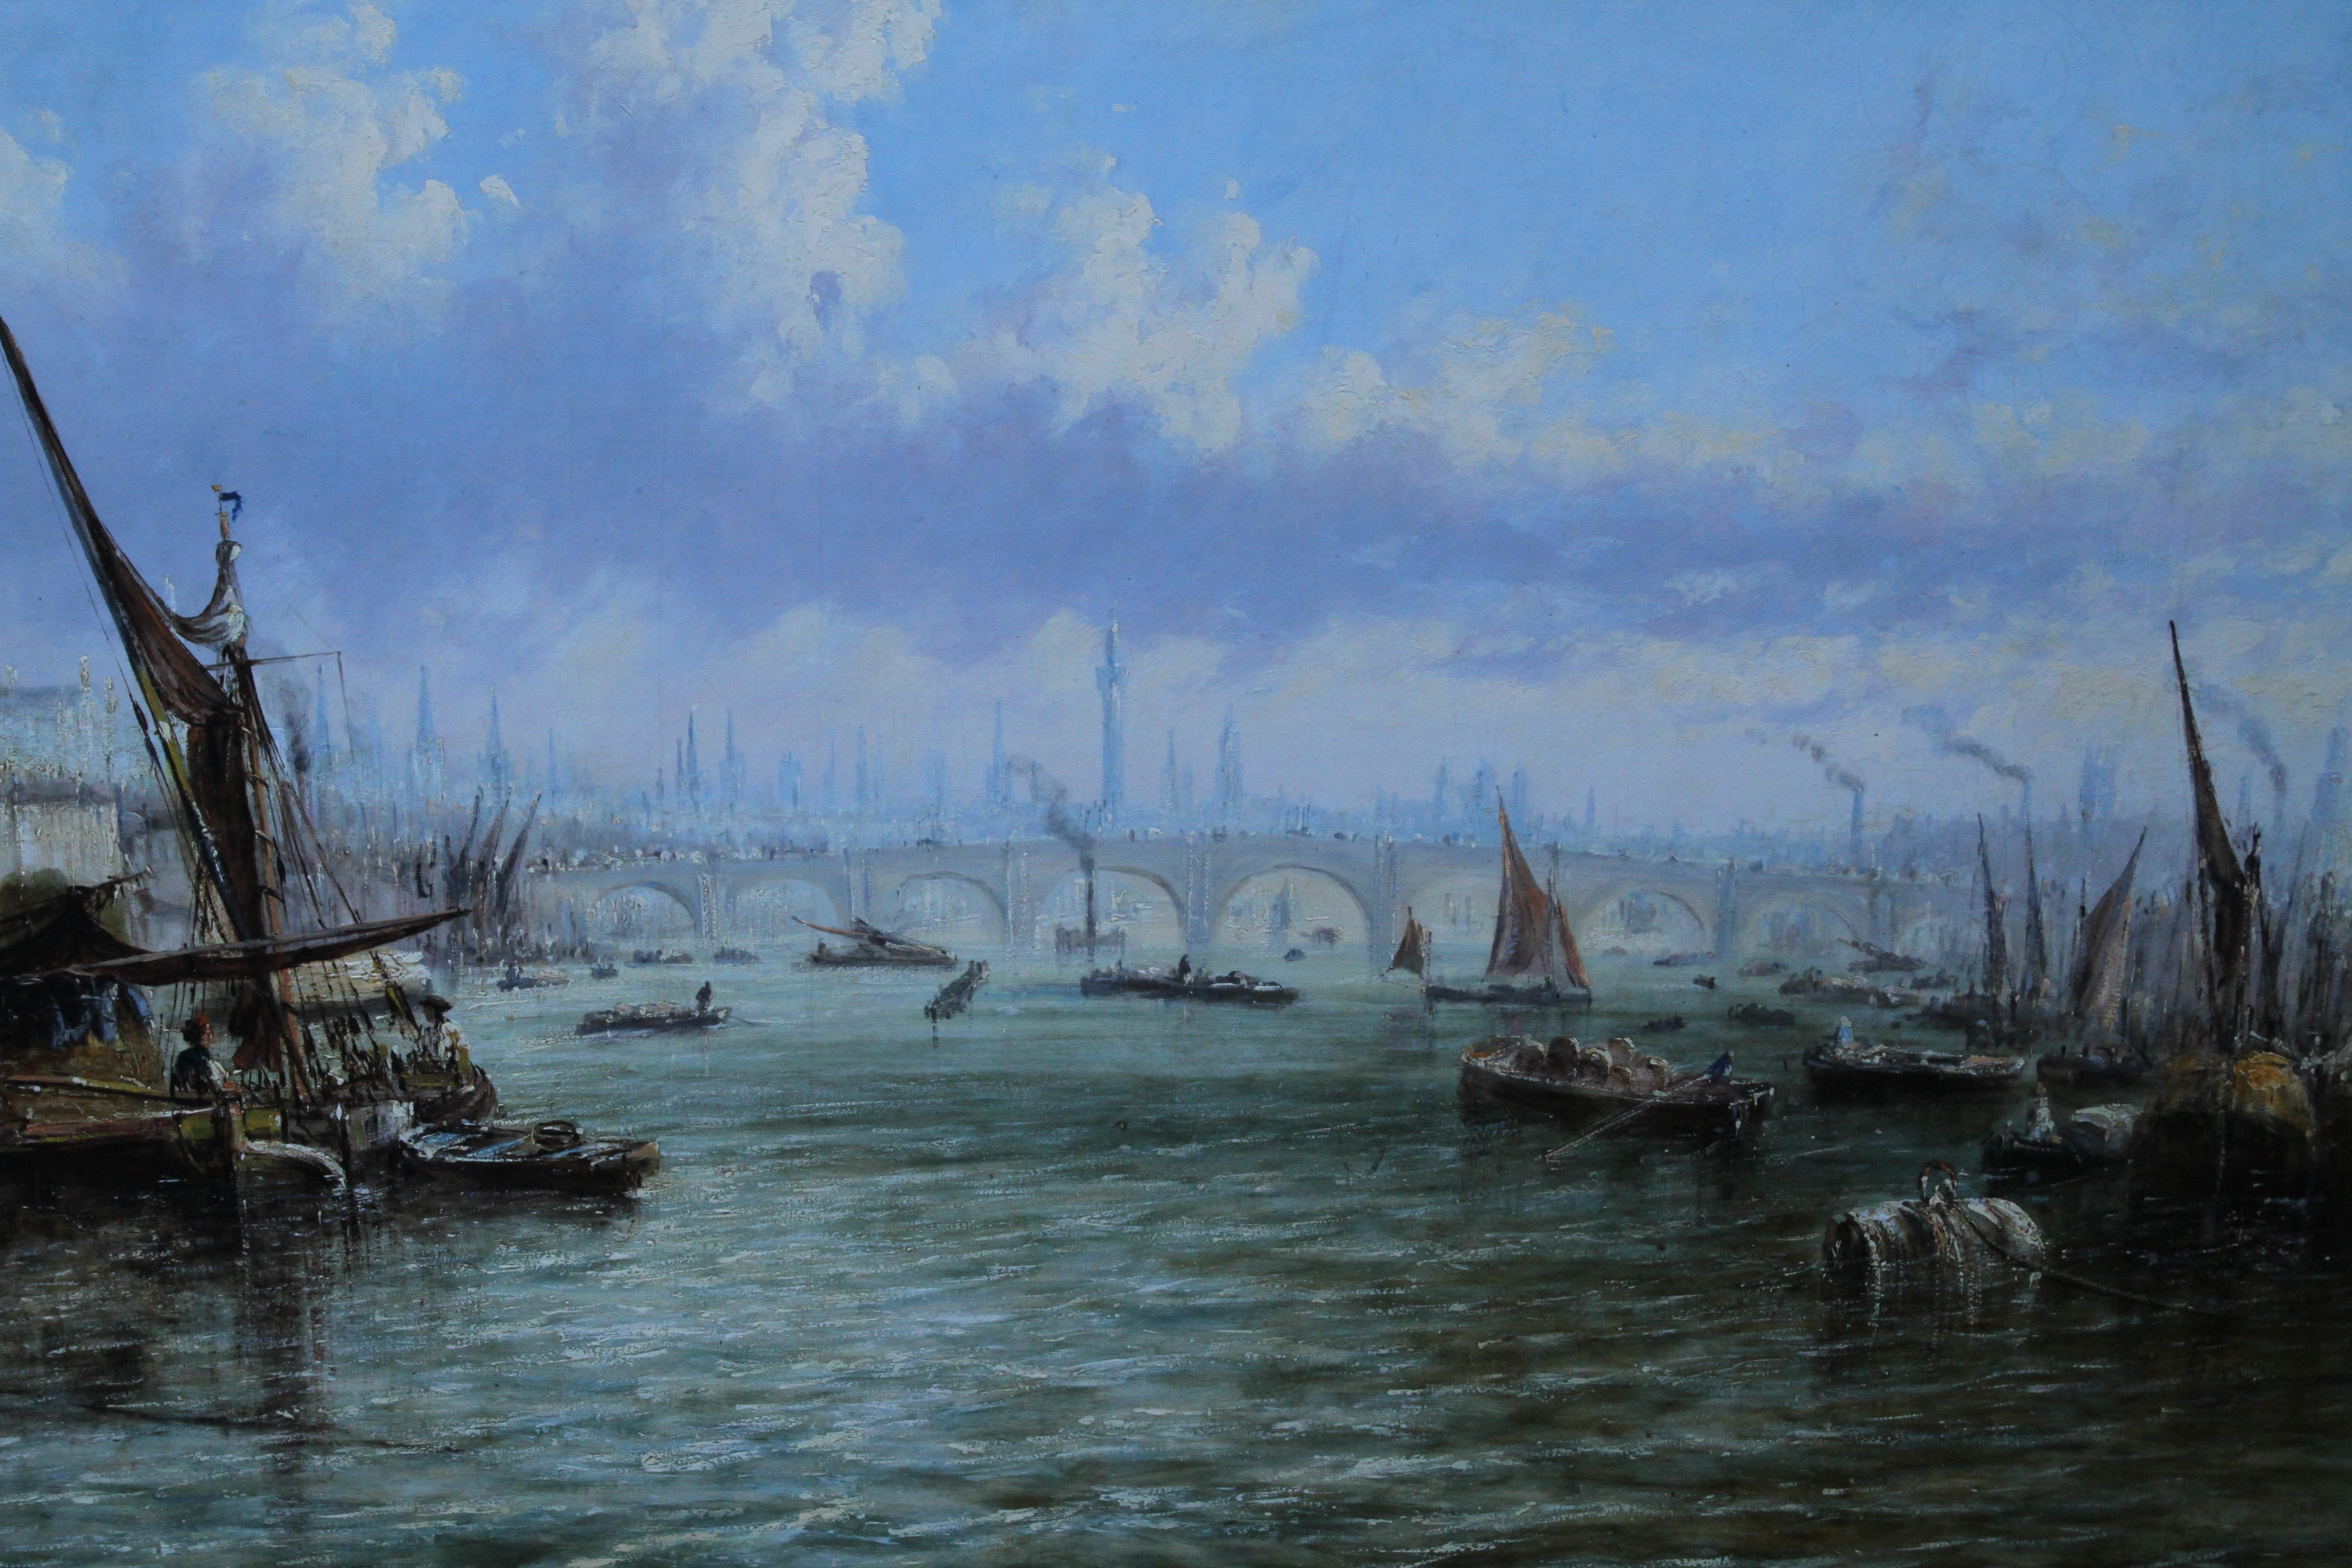 This large captivating and stunning oil painting is by noted Italian artist Francis Moltino. Painted in 1866 the painting is of a view of the Thames with Blackfriars Bridge and the city of London in the background. A glorious day is depicted with a